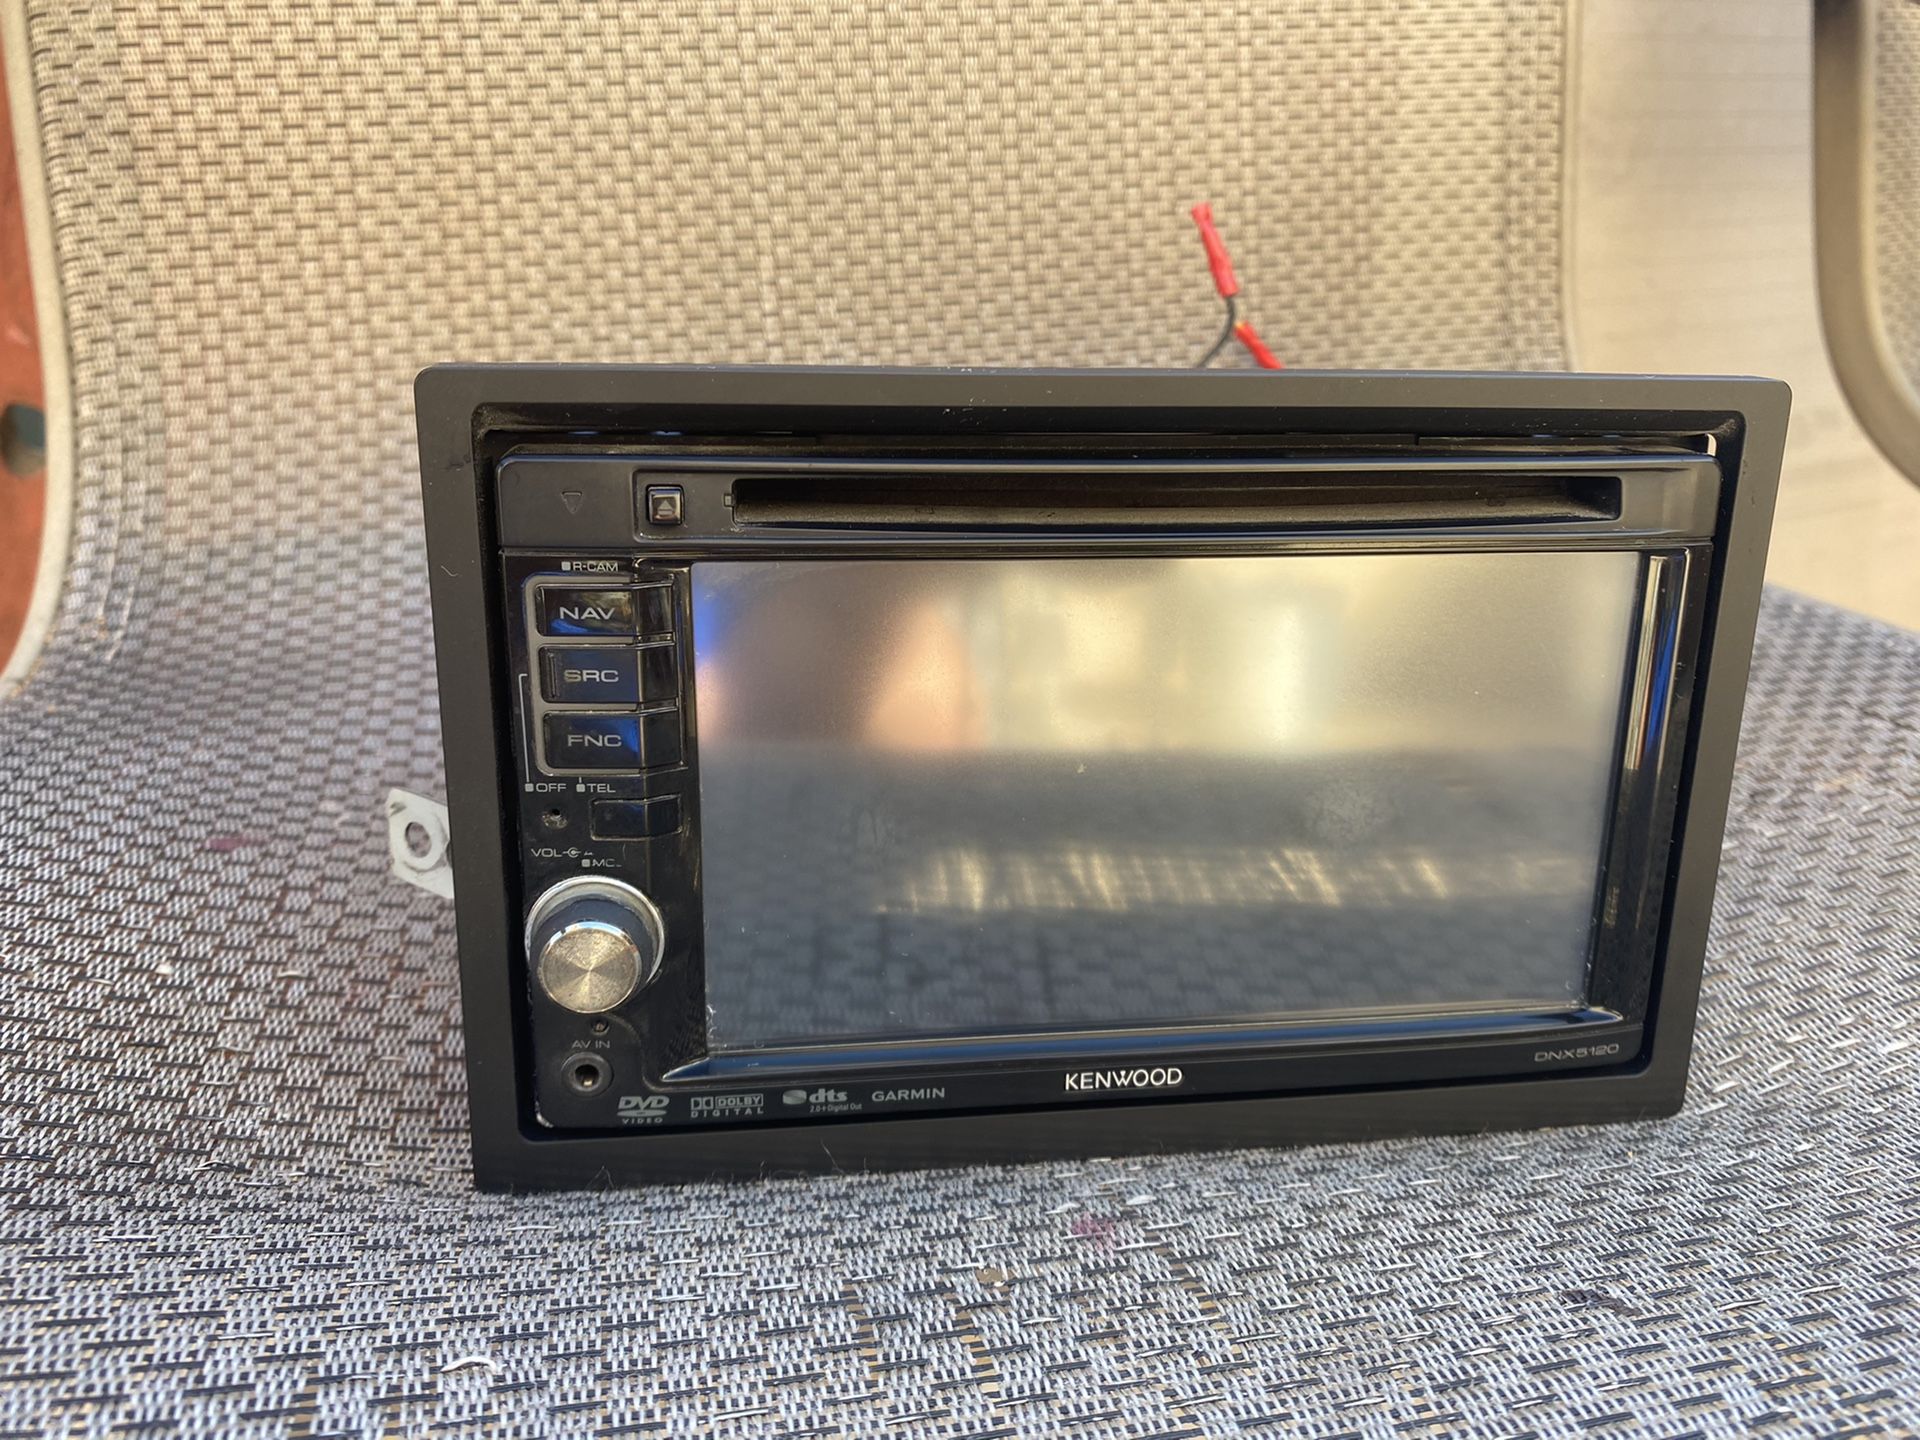 Ken wood touchscreen stereo with dvd option and built in gps